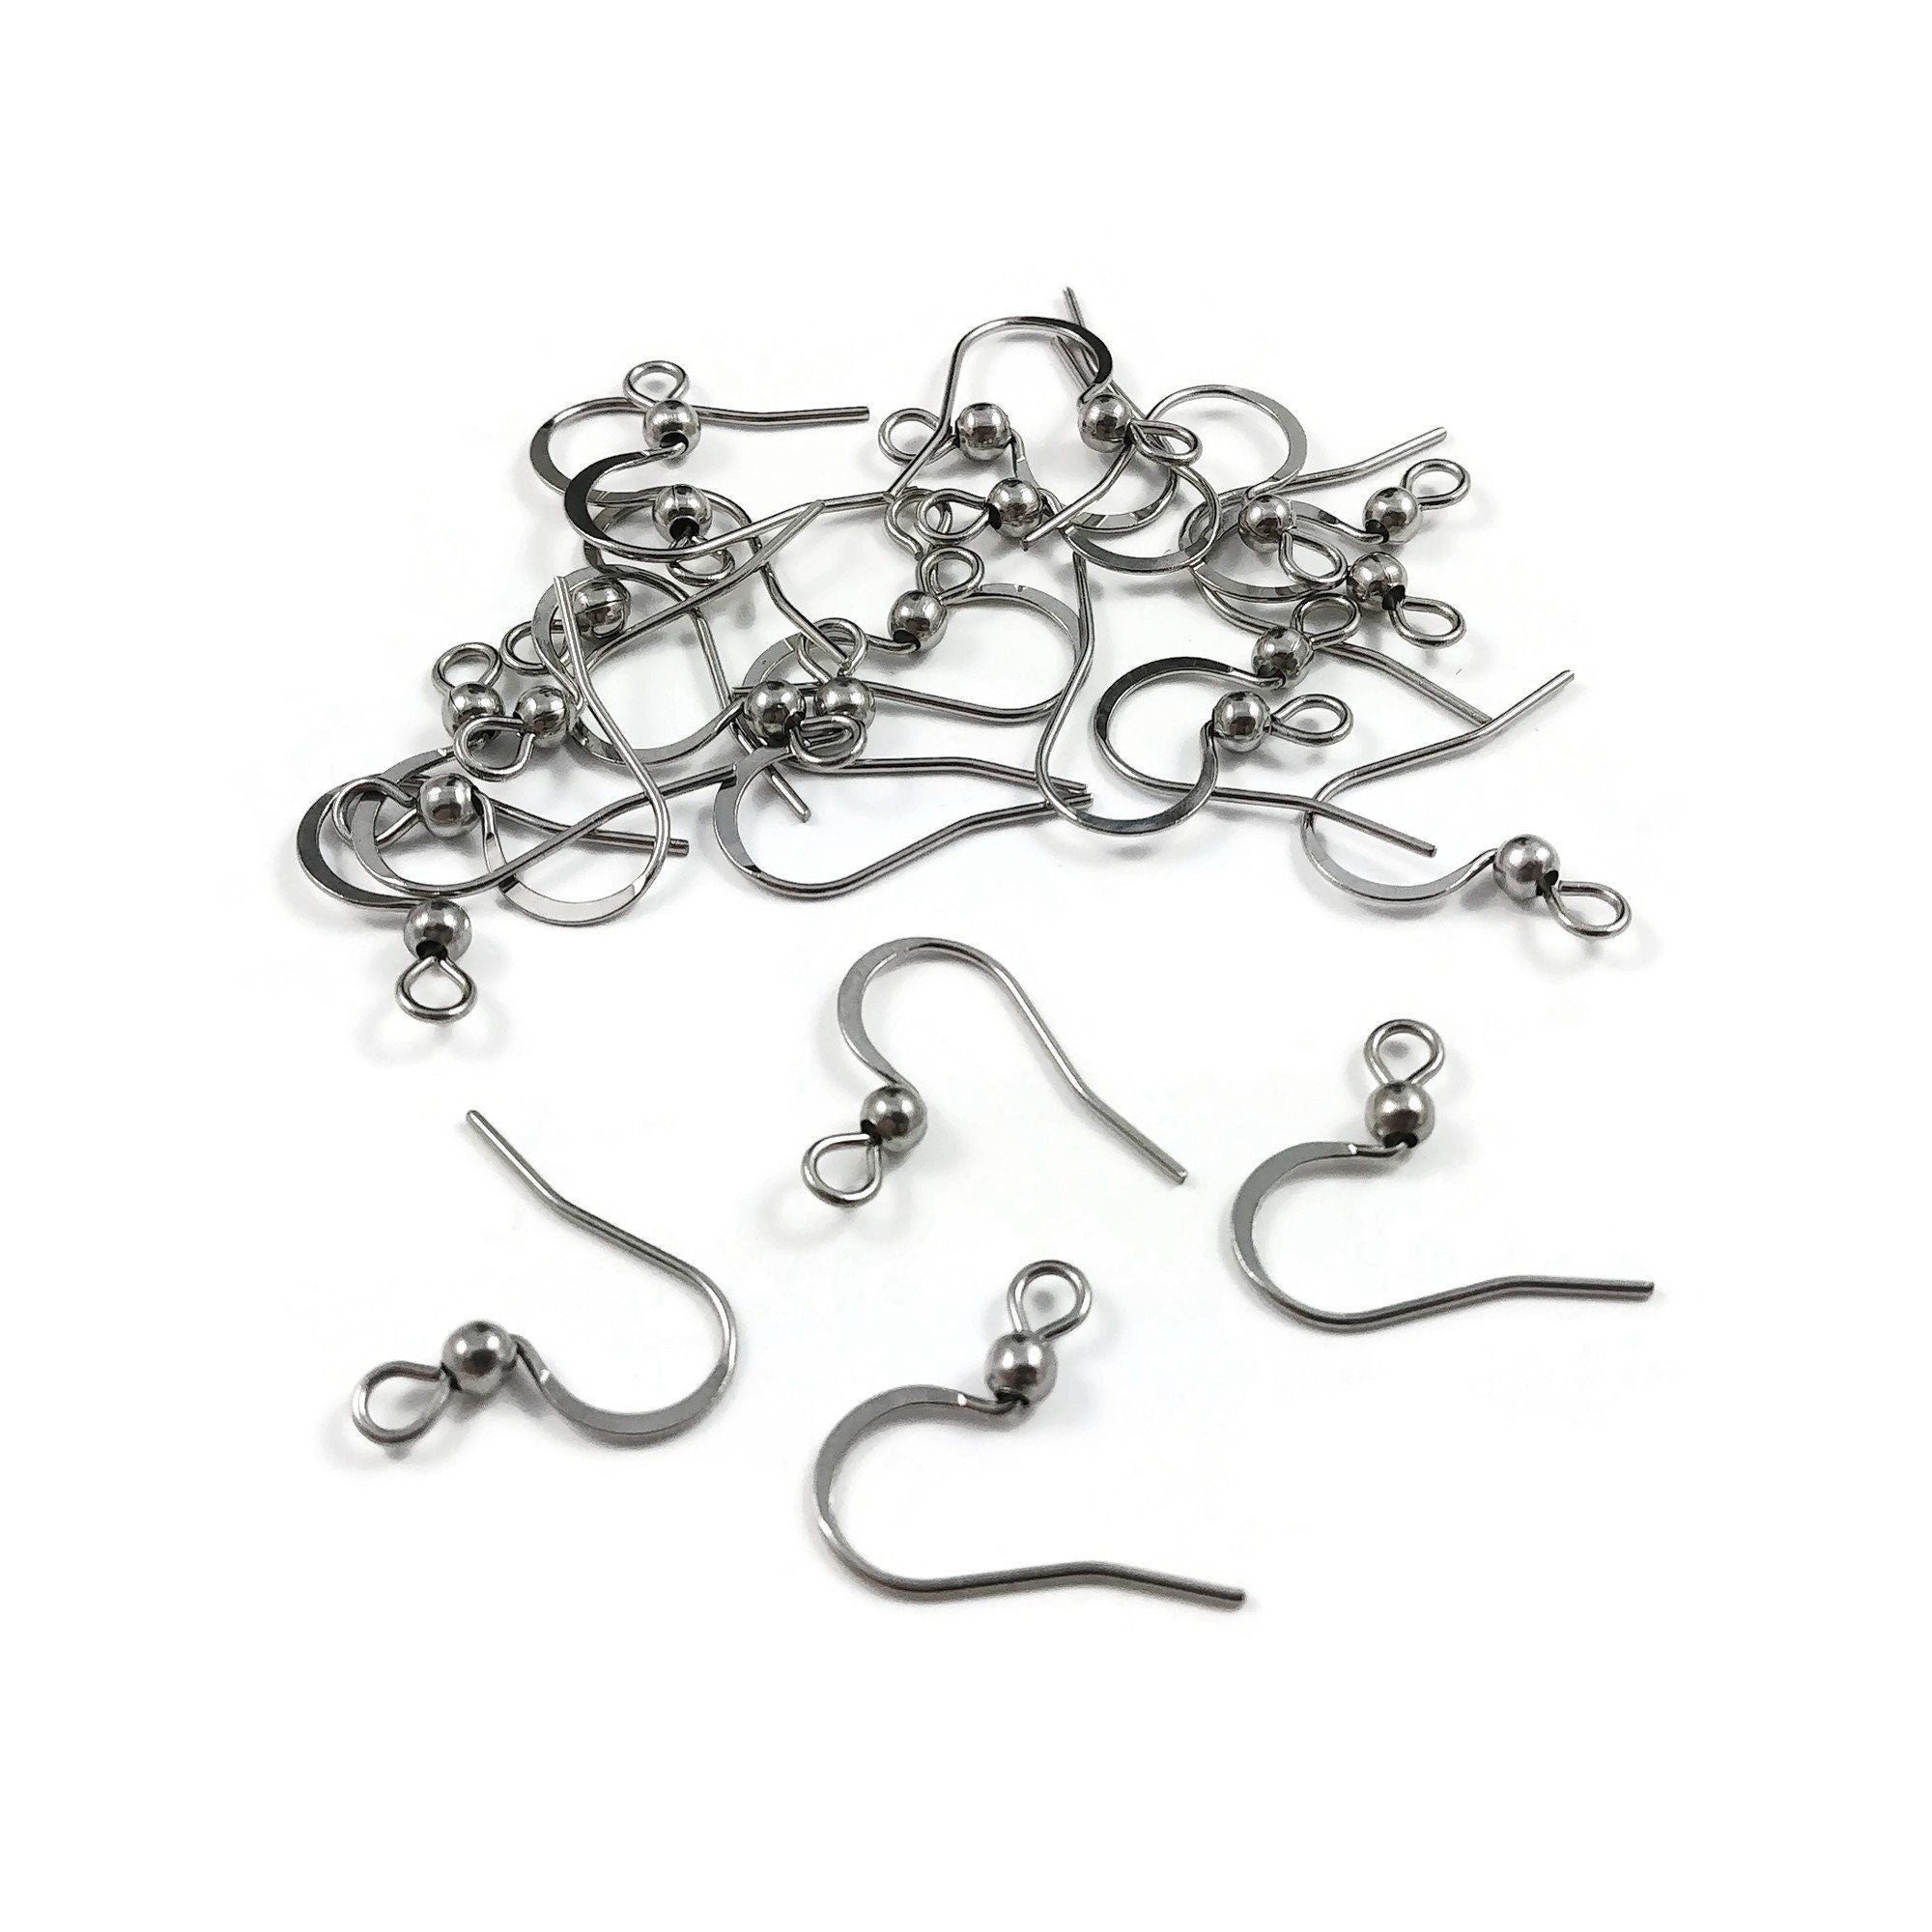 50pcs/lot Gold Steel Tone Anti-allergenic Stainless Steel Surgical Steel  Earring Hooks for Earring Making Accessories Hand Made